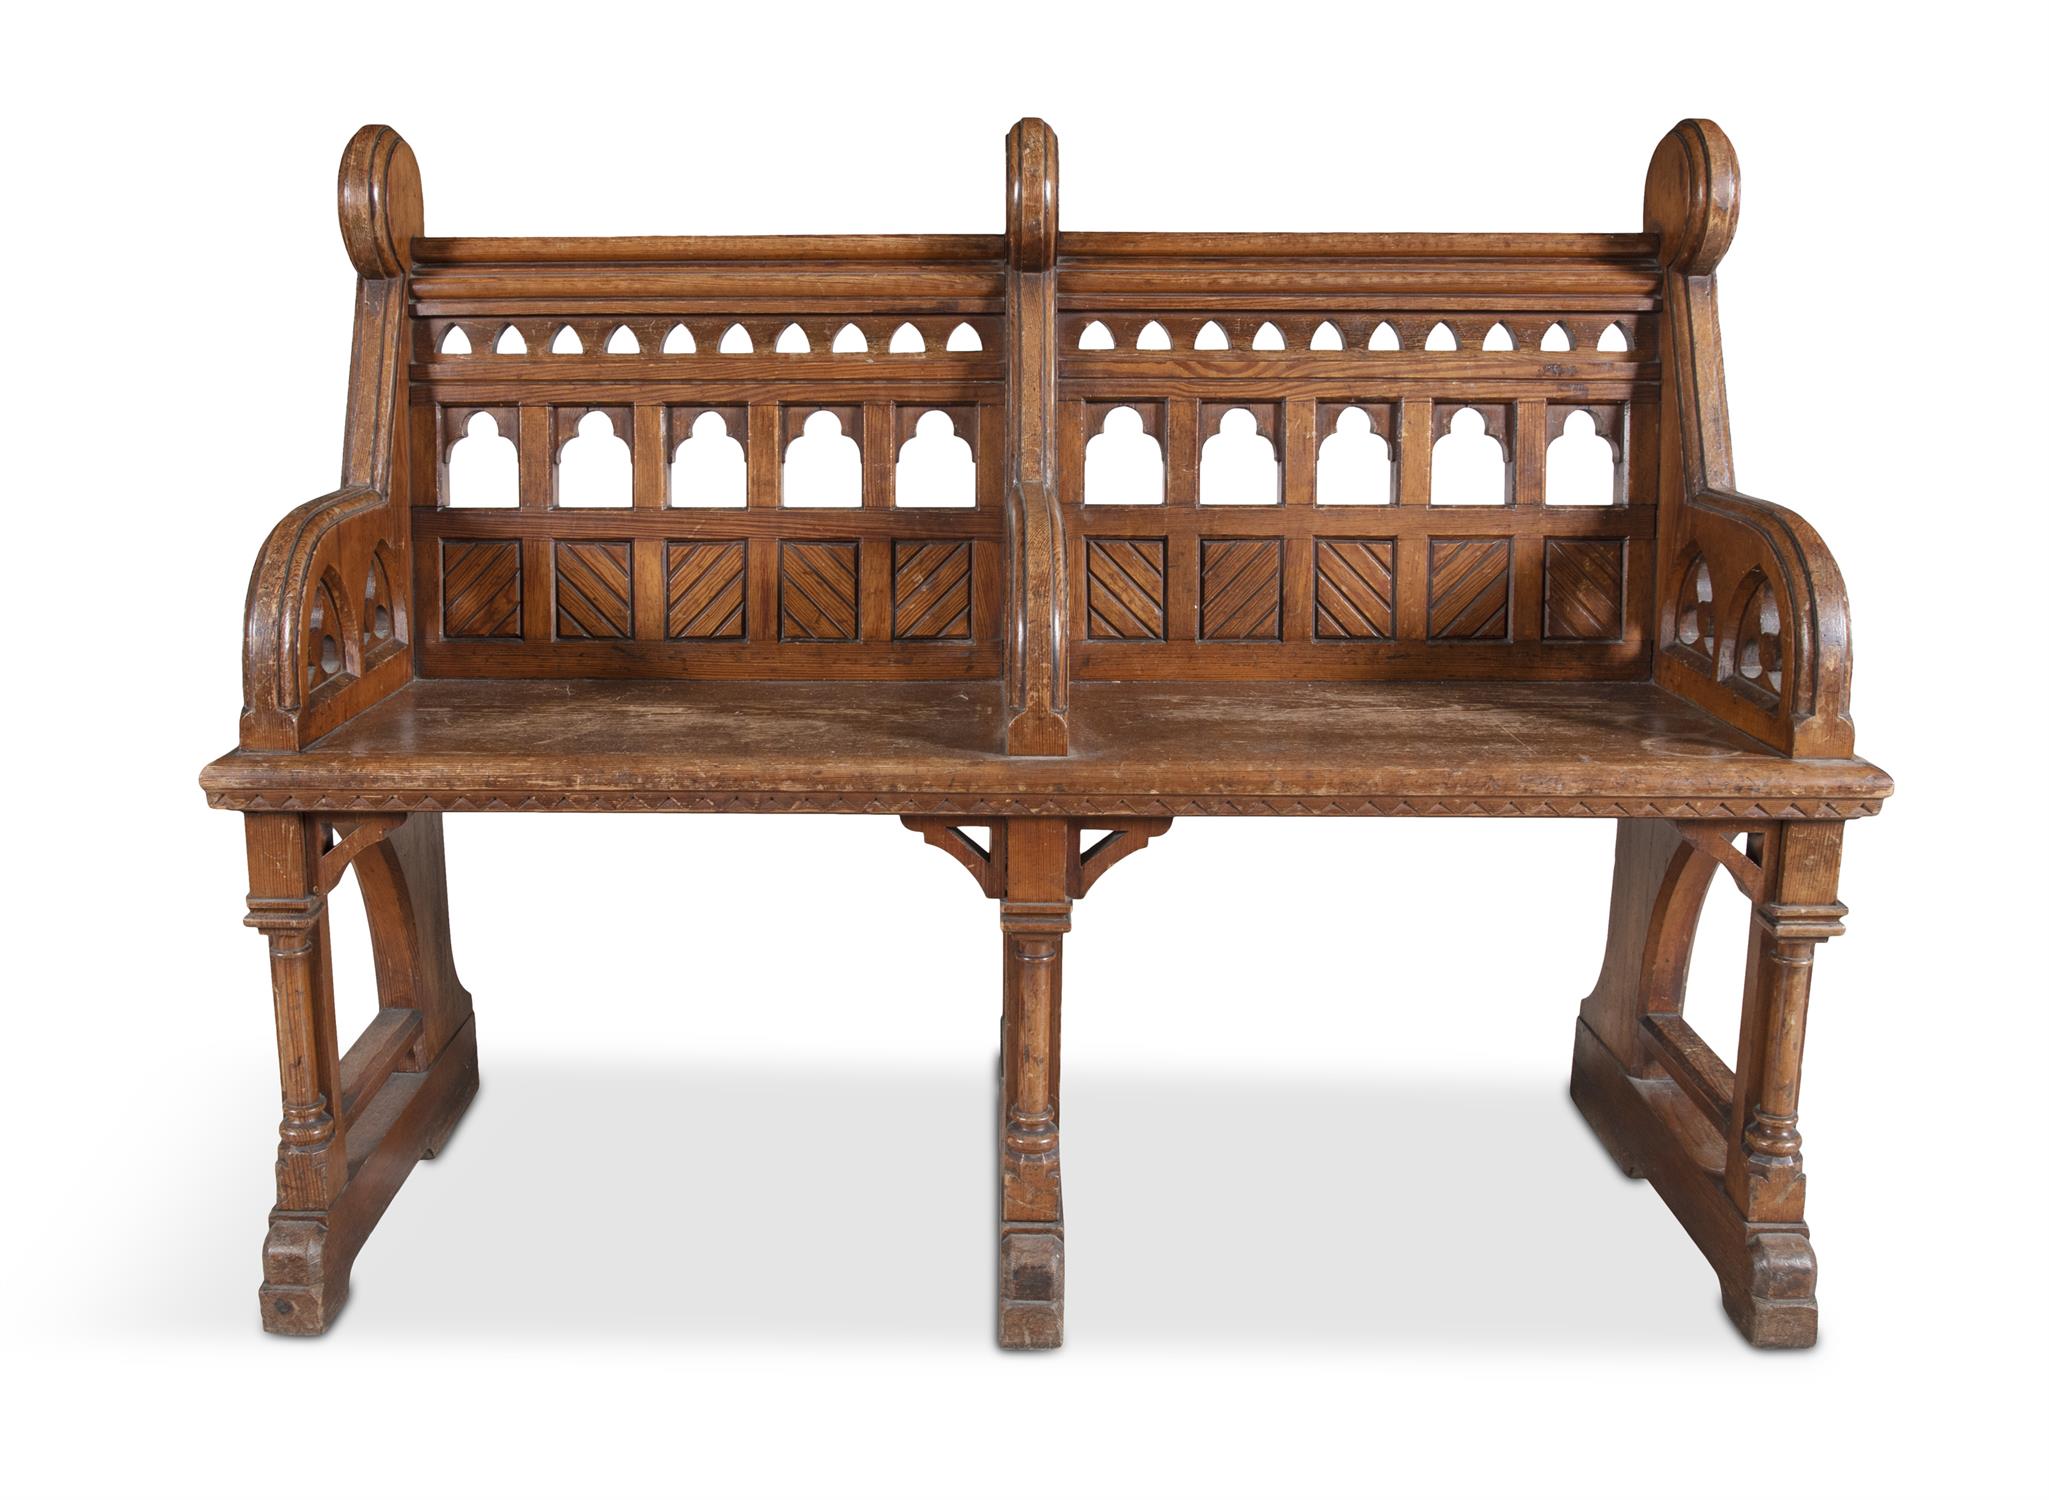 A 19TH CENTURY OAK BENCH, in the manner of Pugin, the rectangular back pierced and carved with